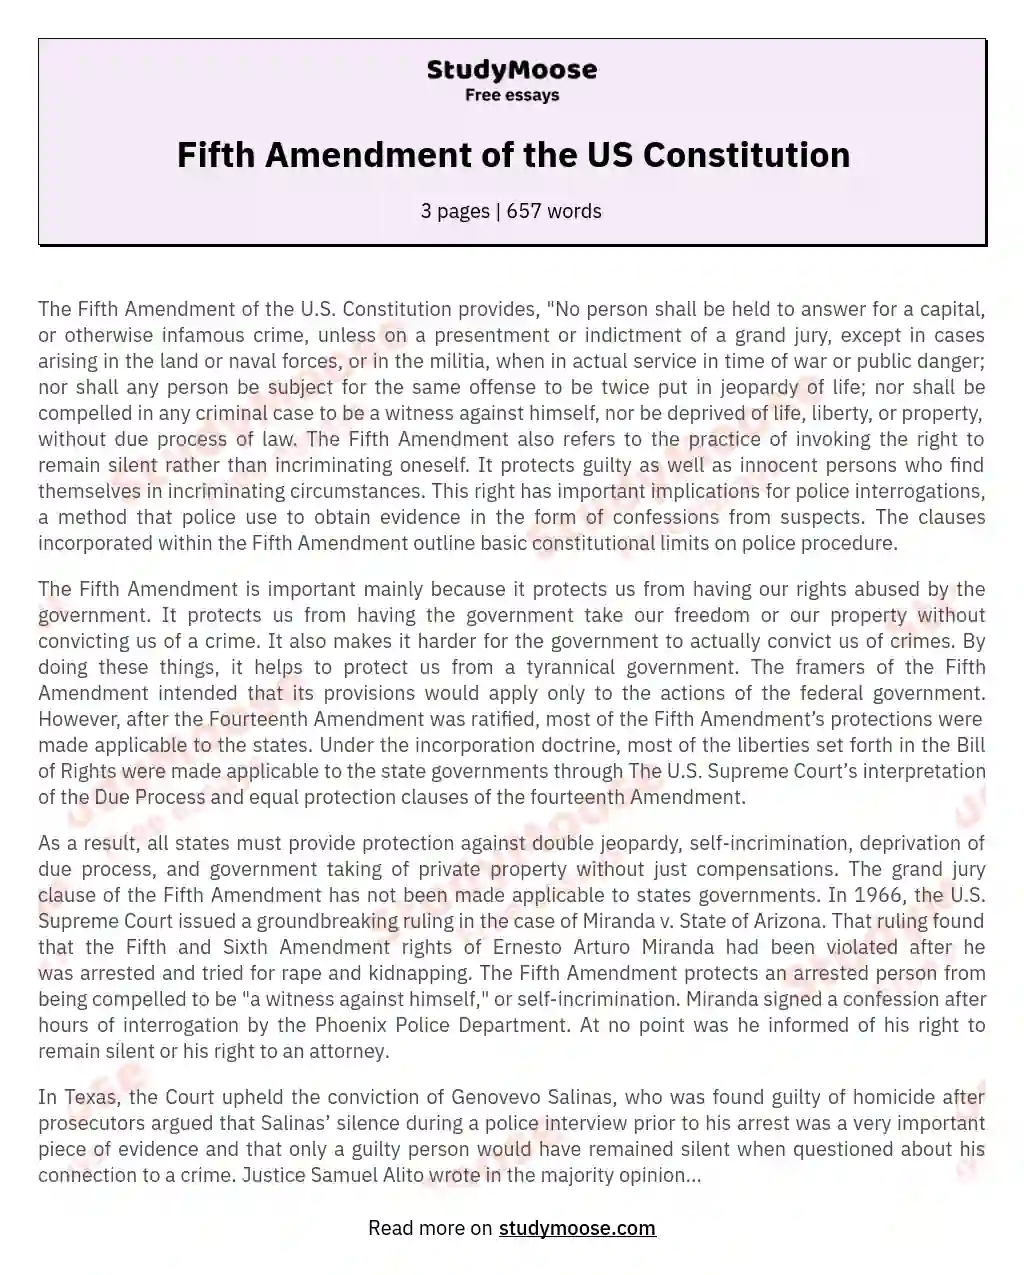 Fifth Amendment of the US Constitution essay